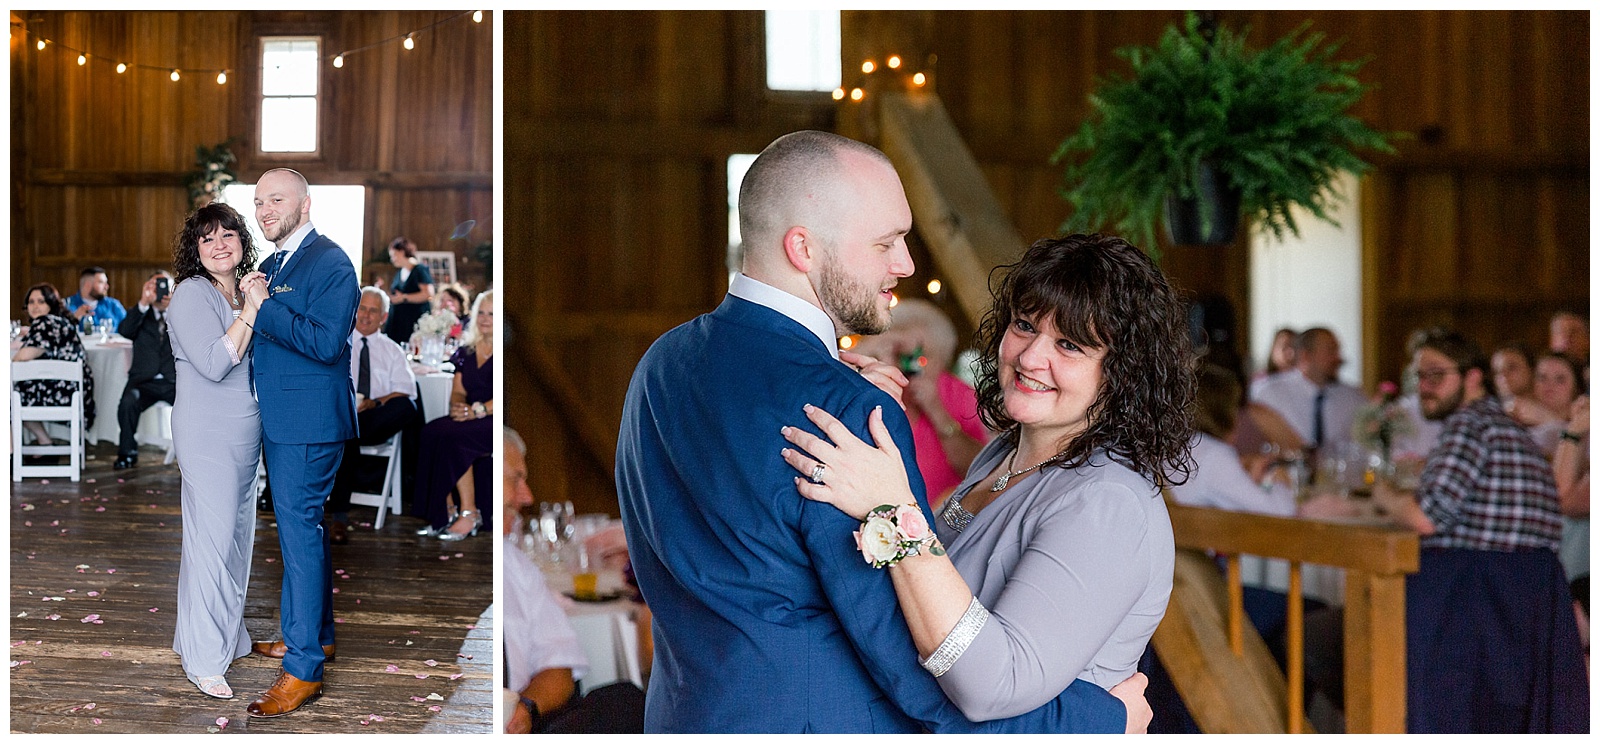 the groom and his mother share a special dance at his wedding reception at lakefield weddings, a modern barn wedding venue